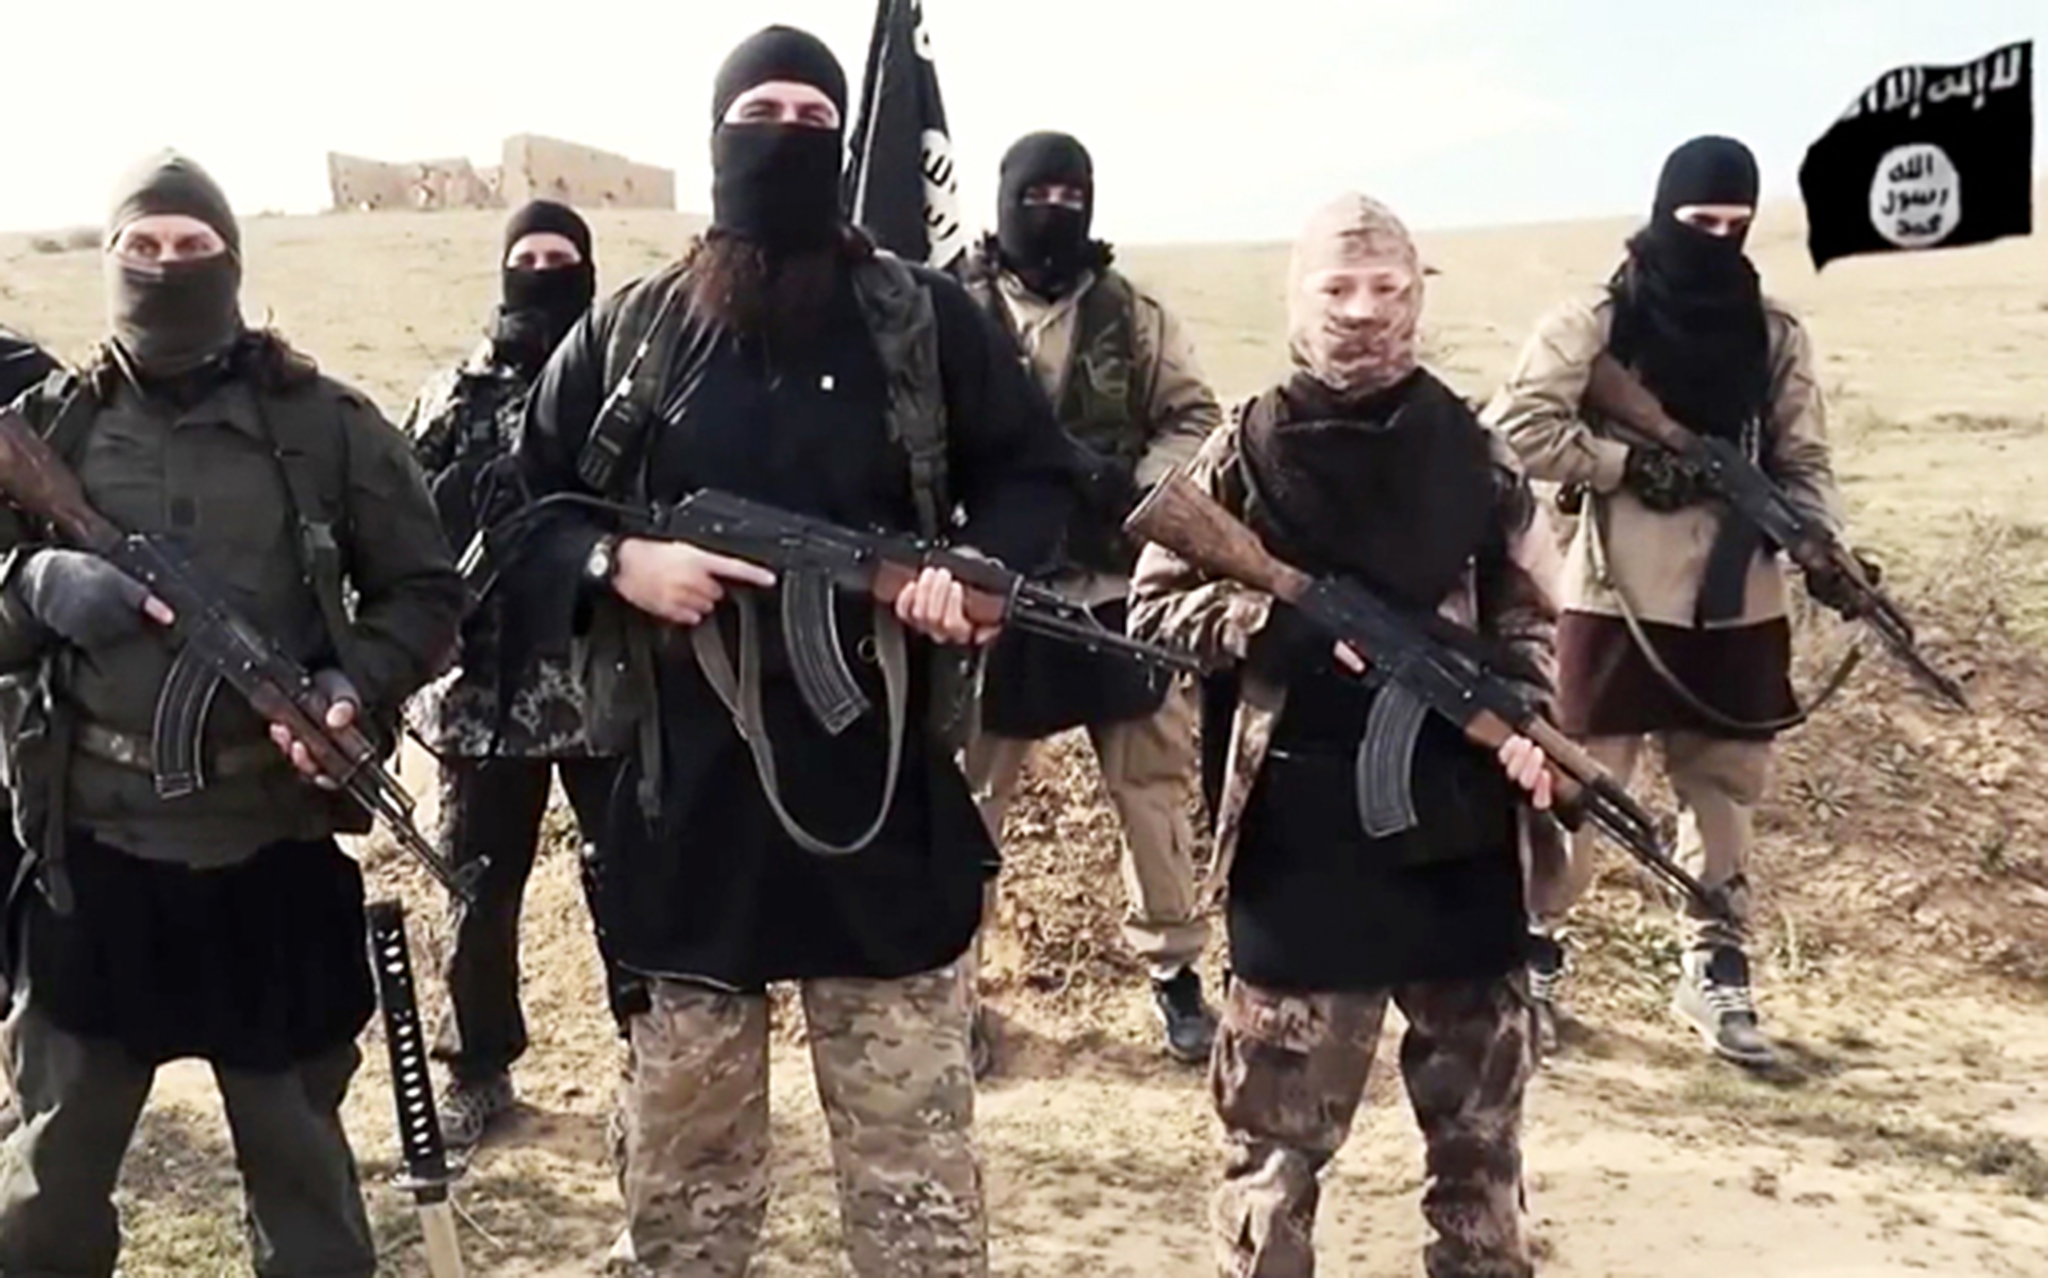 State Department’s open admission: ISIS will send terrorists posing as refugees